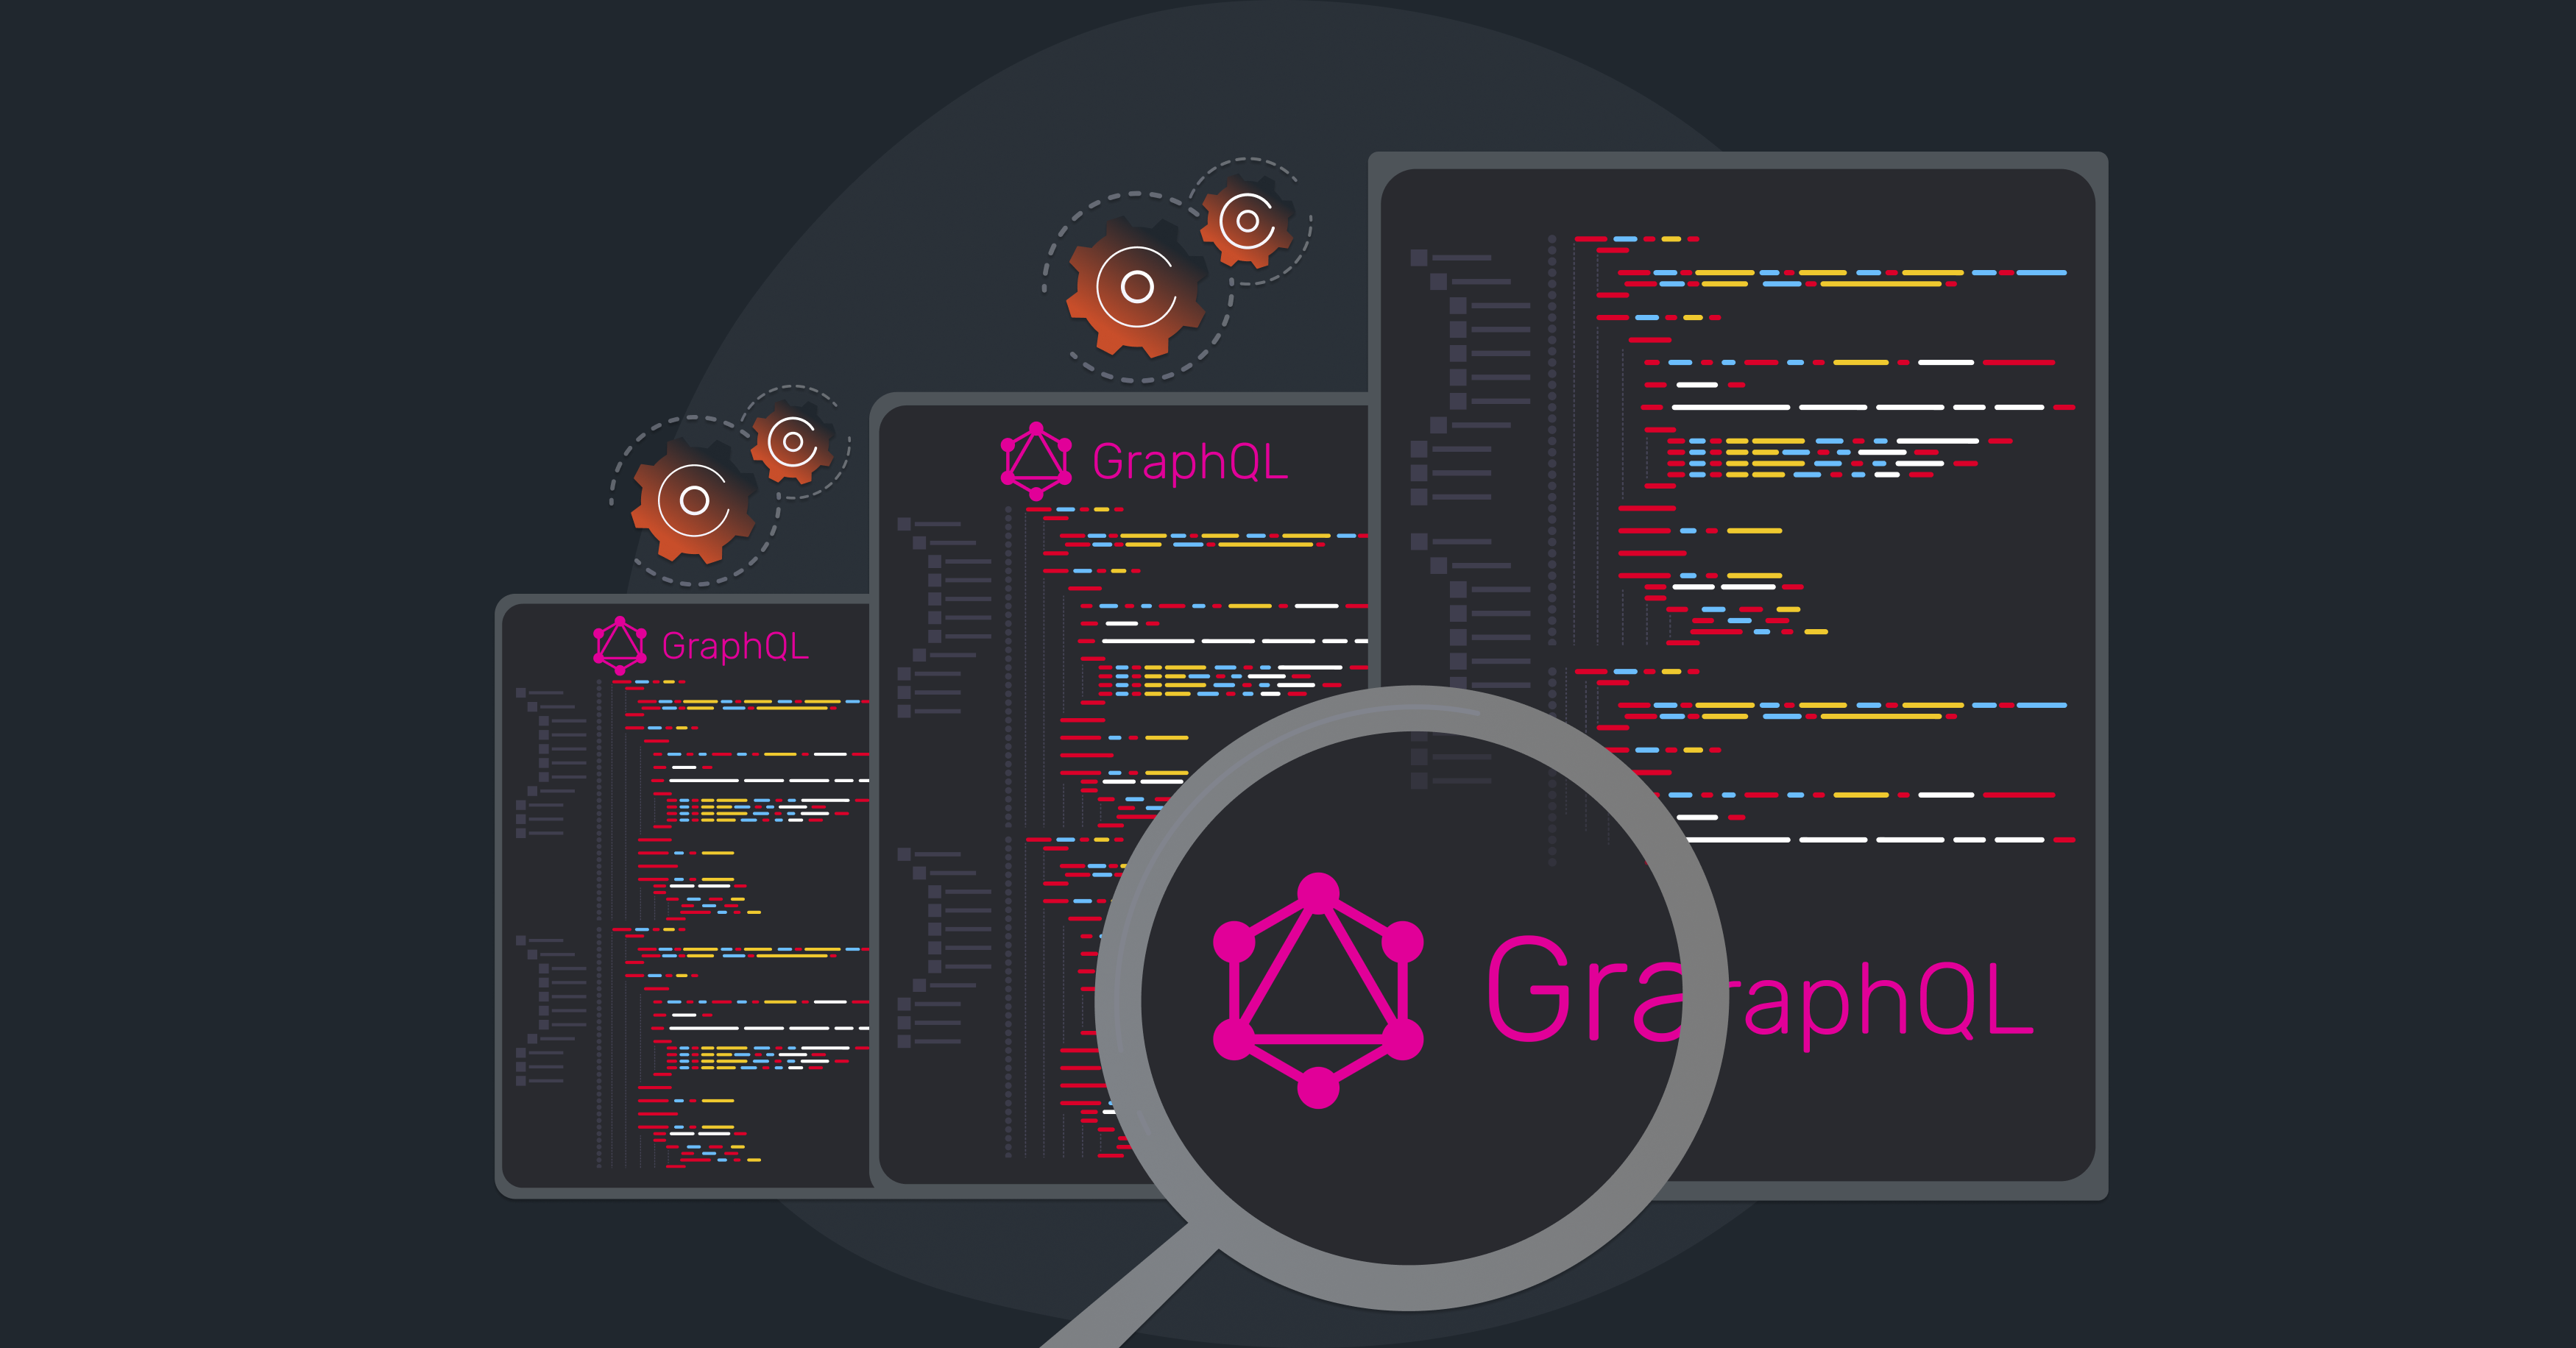 Your guide to GraphQL